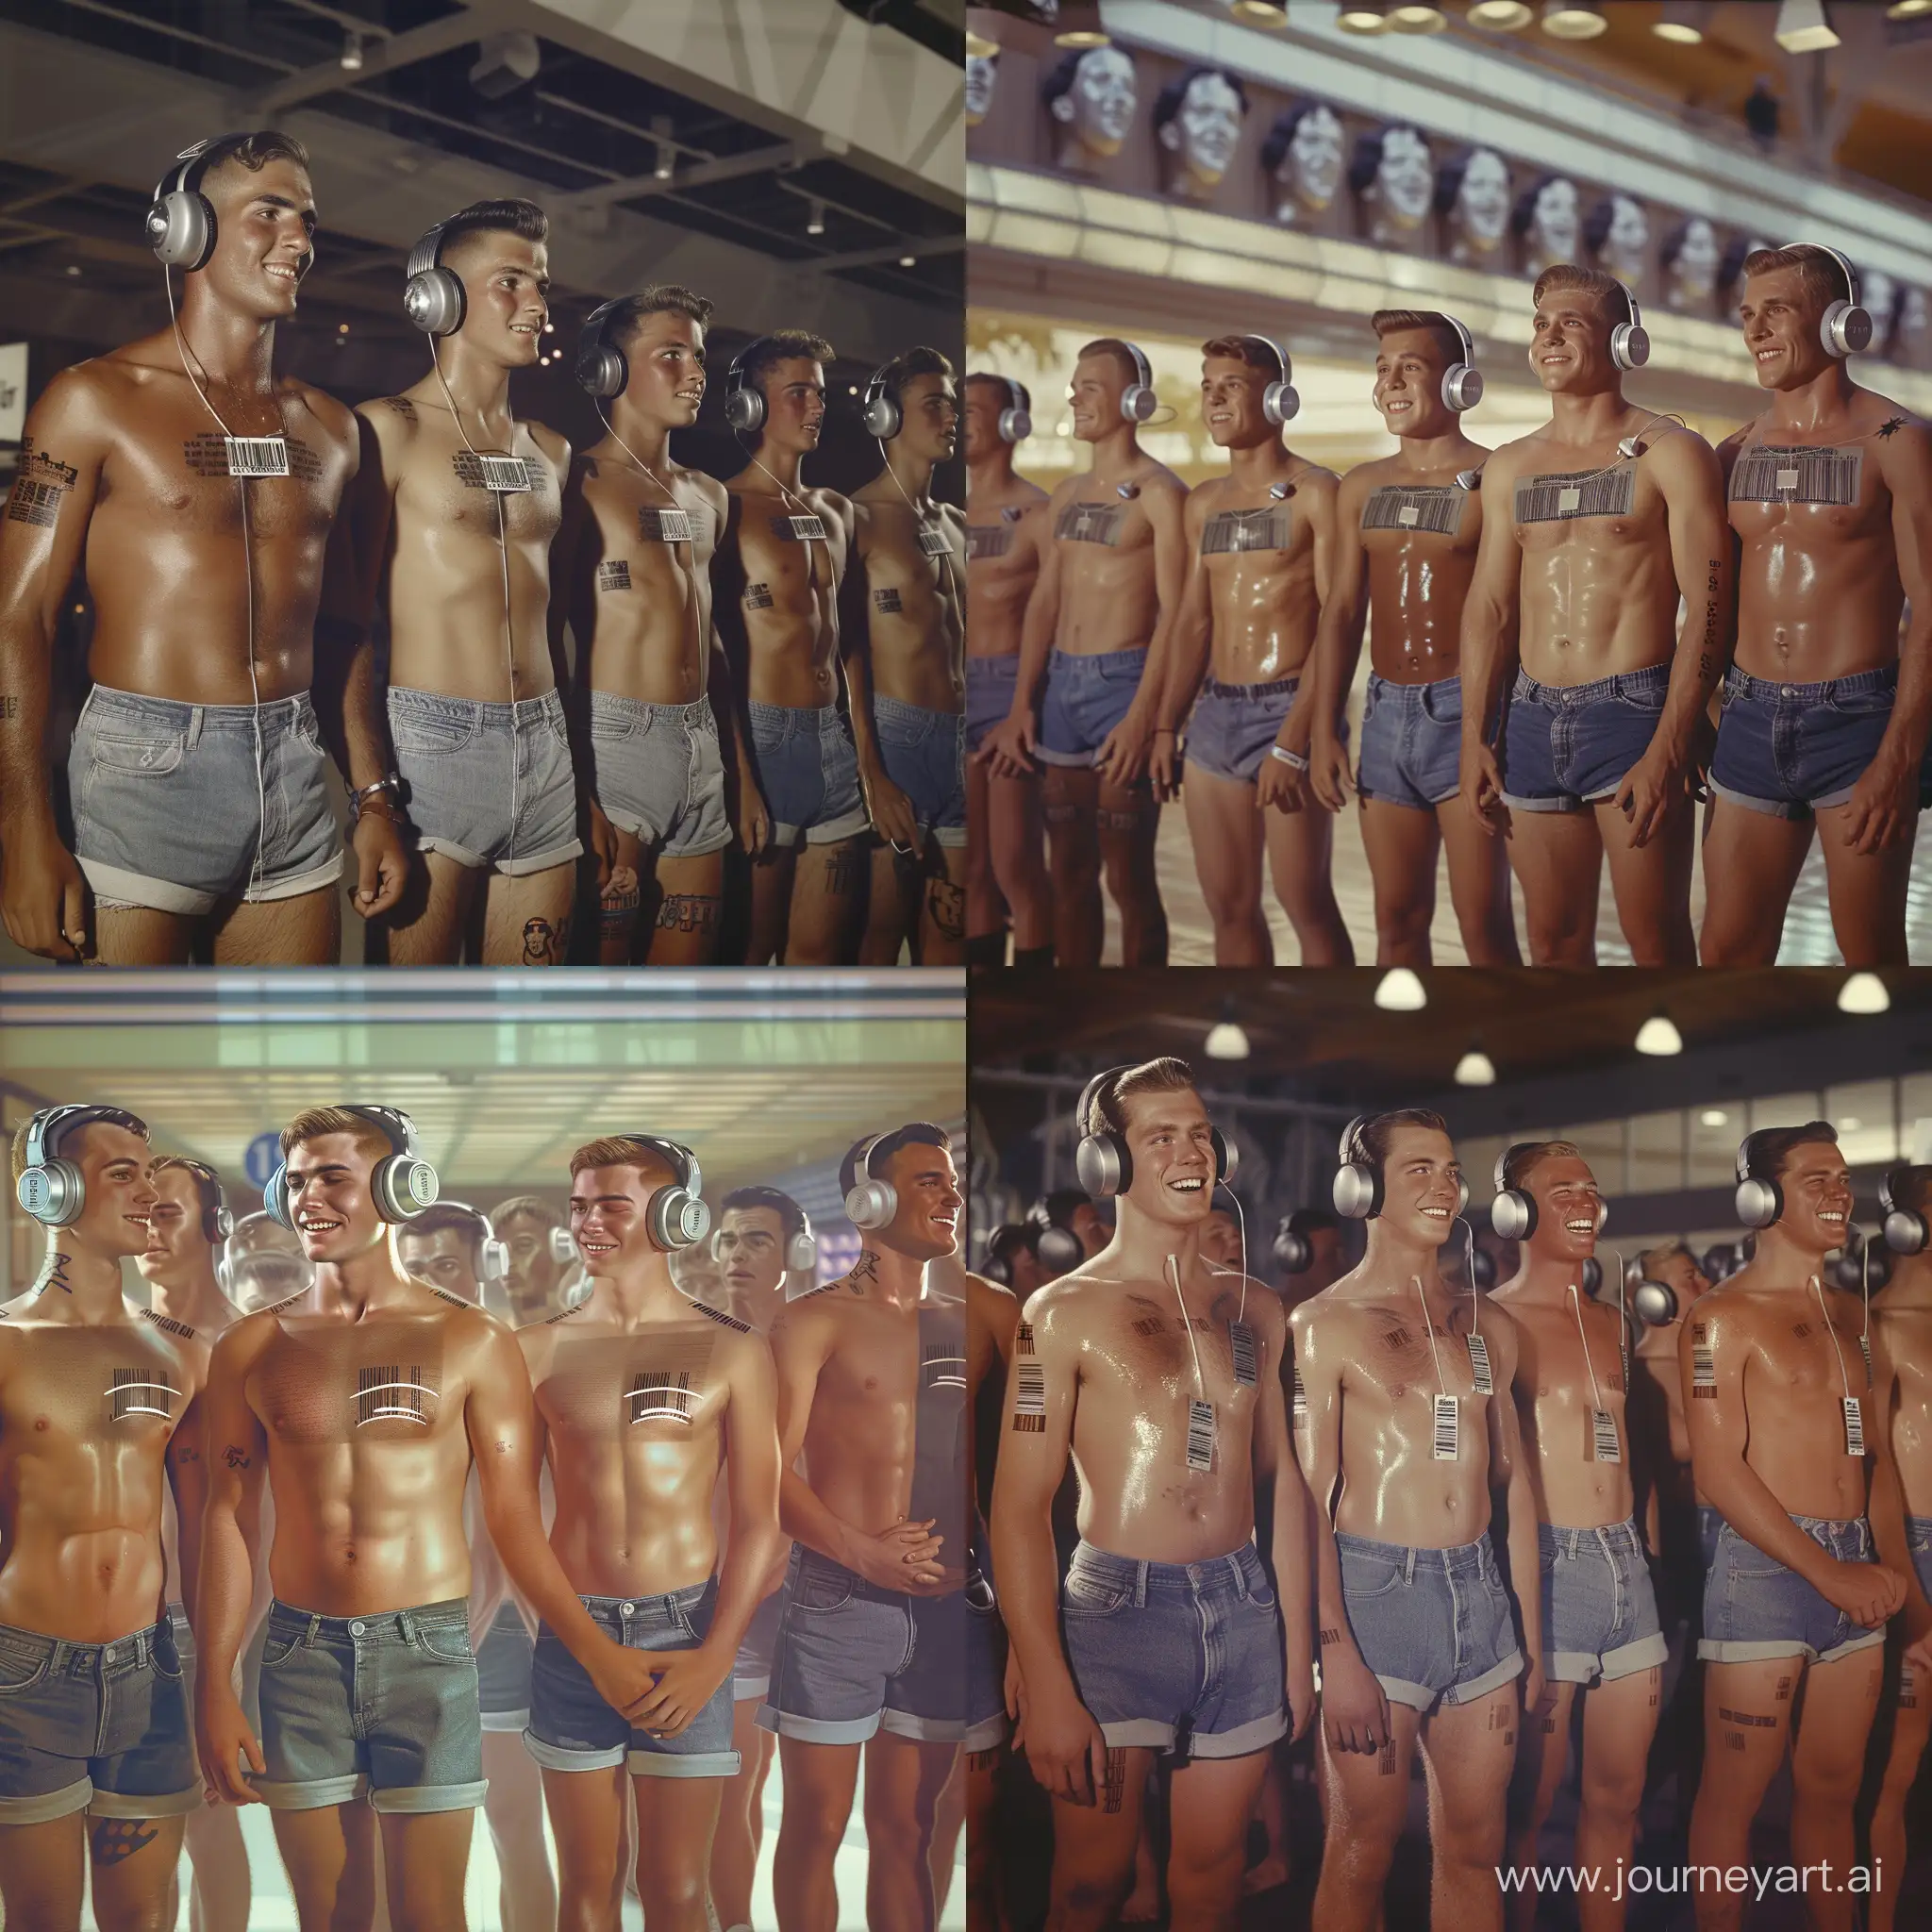 Handsome muscular middle-aged men and handsome muscular college-age boys each wear silver headphones and fitted denim cutoff shorts, dazed smiles, small barcode tattooed on each man's chest, 1950s shopping mall setting, facing the viewer, mass indoctrination, color image, hyperrealistic, cinematic